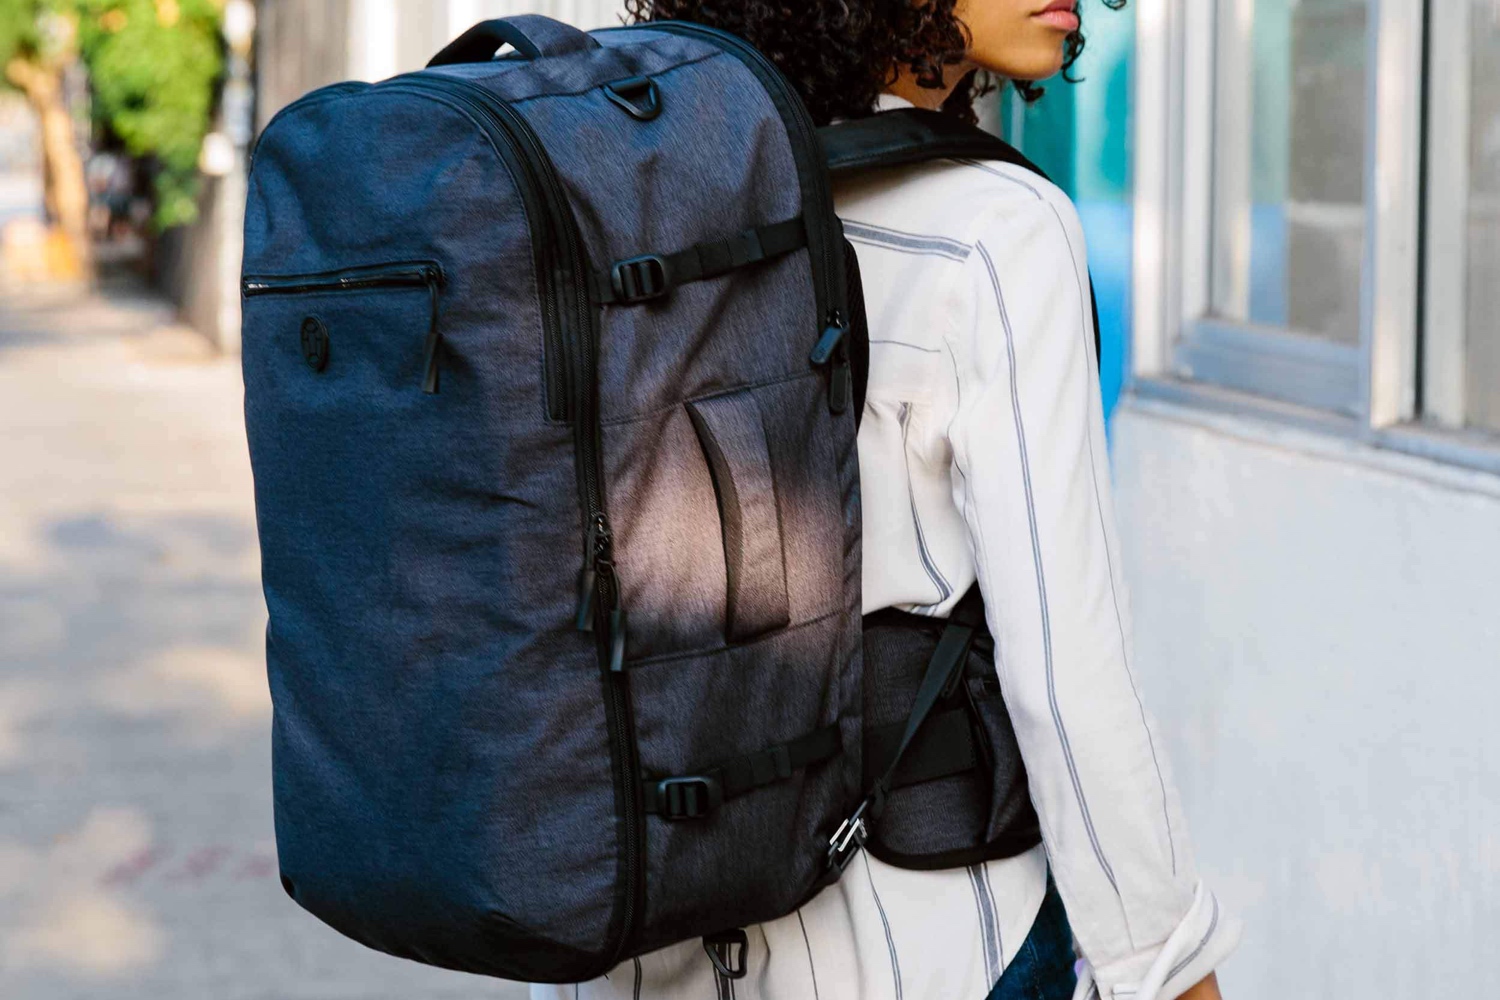 17 Best Laptop Bags for Women Travelers On the Go